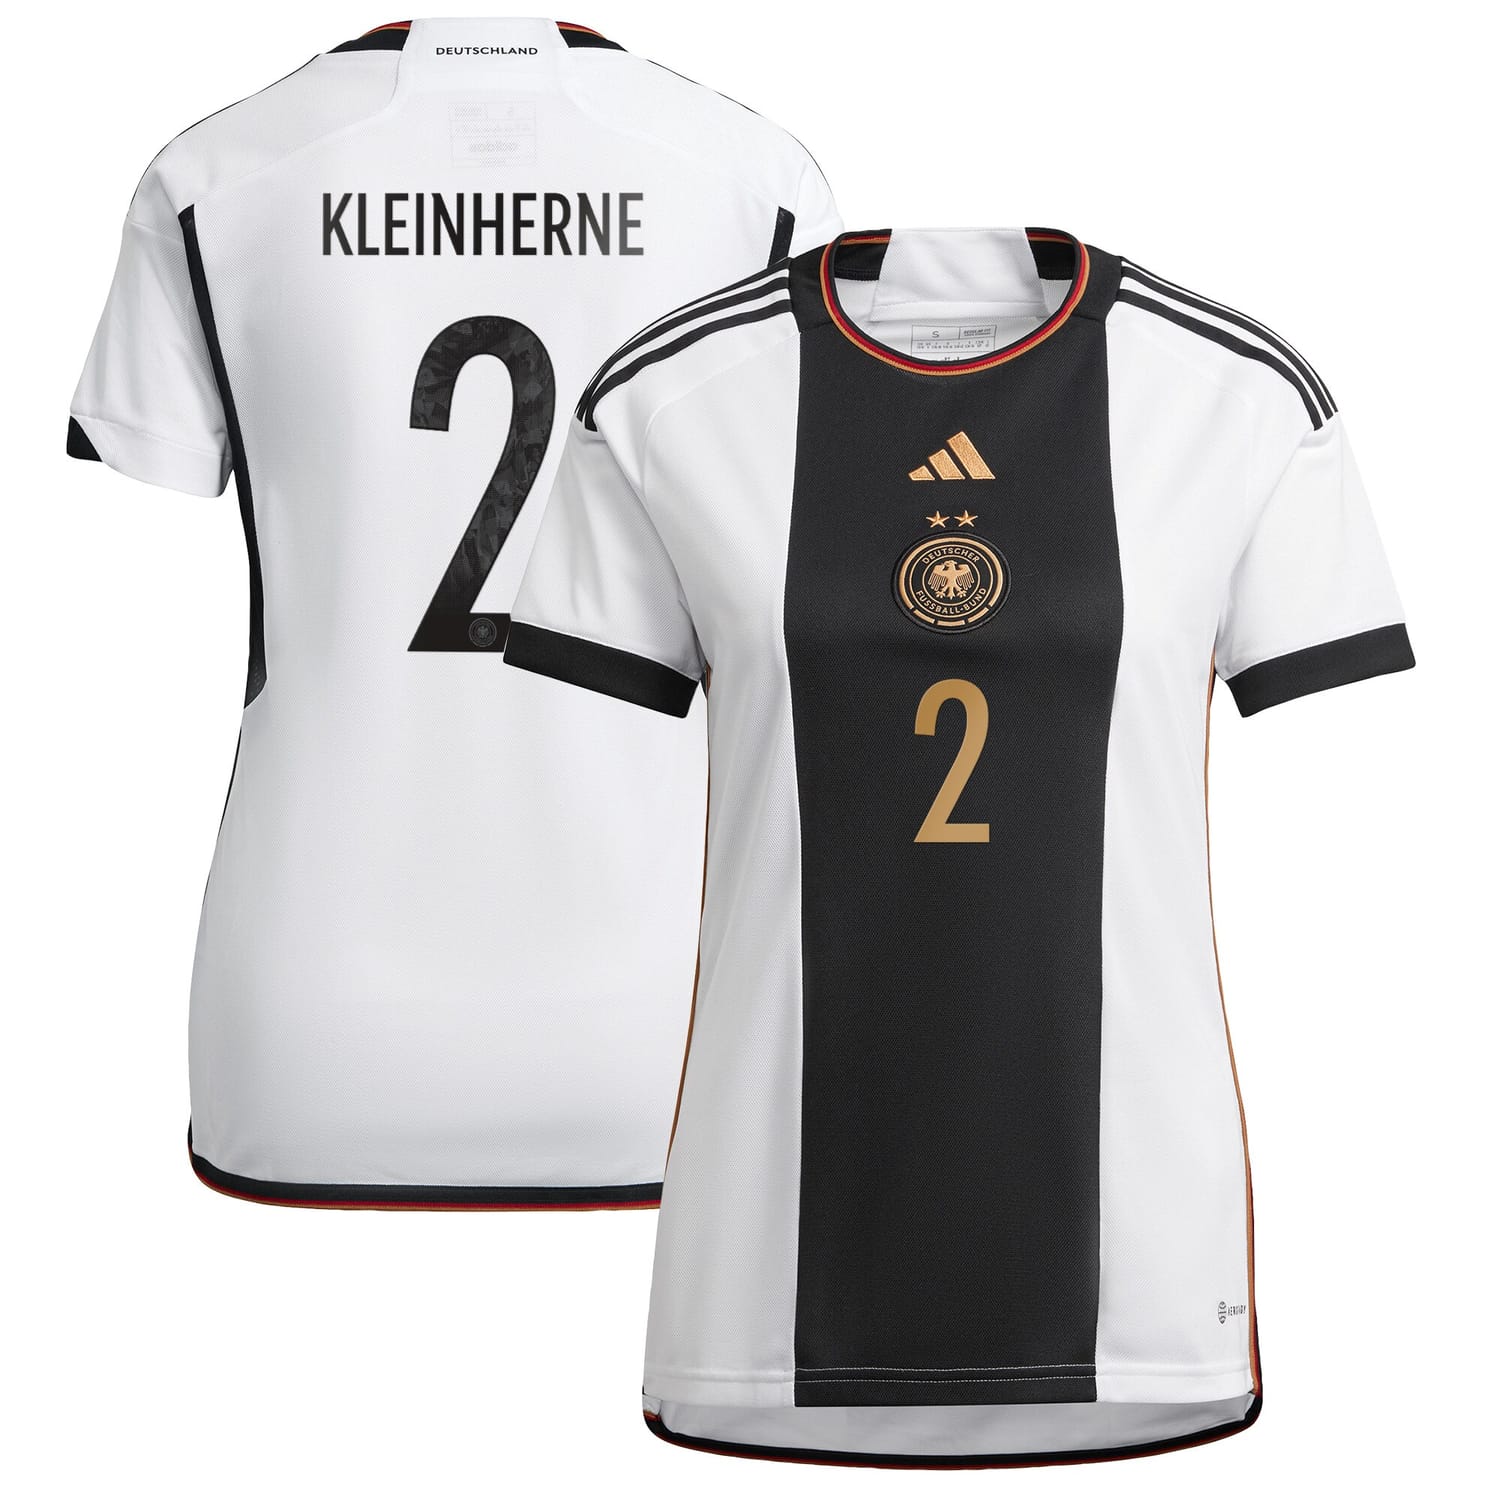 Germany National Team Home Jersey Shirt player Sophia Kleinherne 2 printing for Women